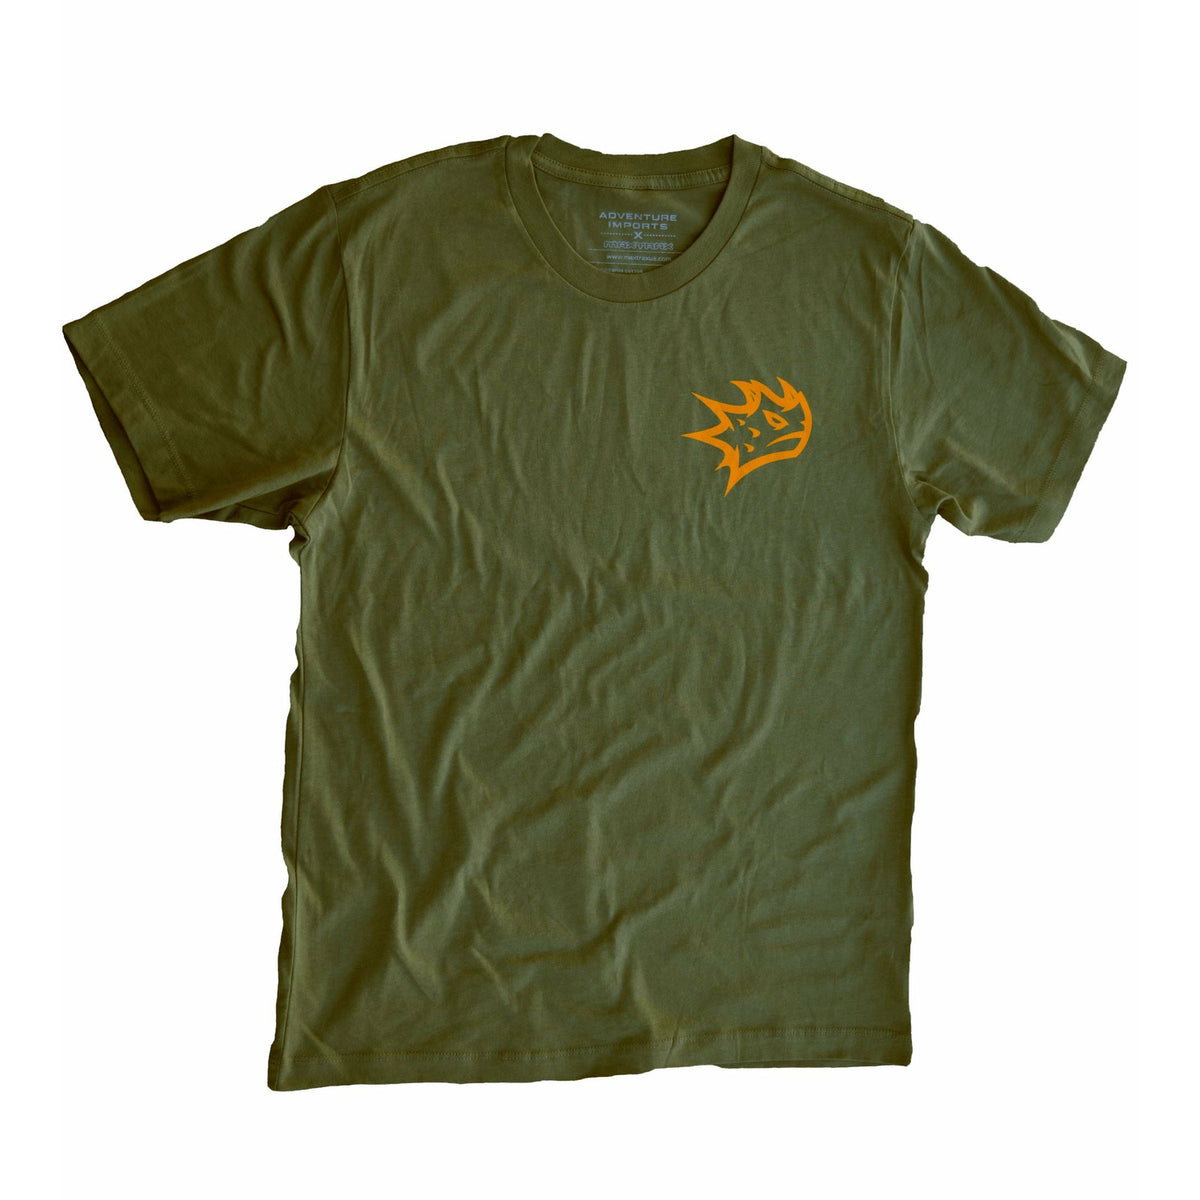 MAXTRAX Tee - Olive Drab  Apparel Adventure Imports- Overland Kitted